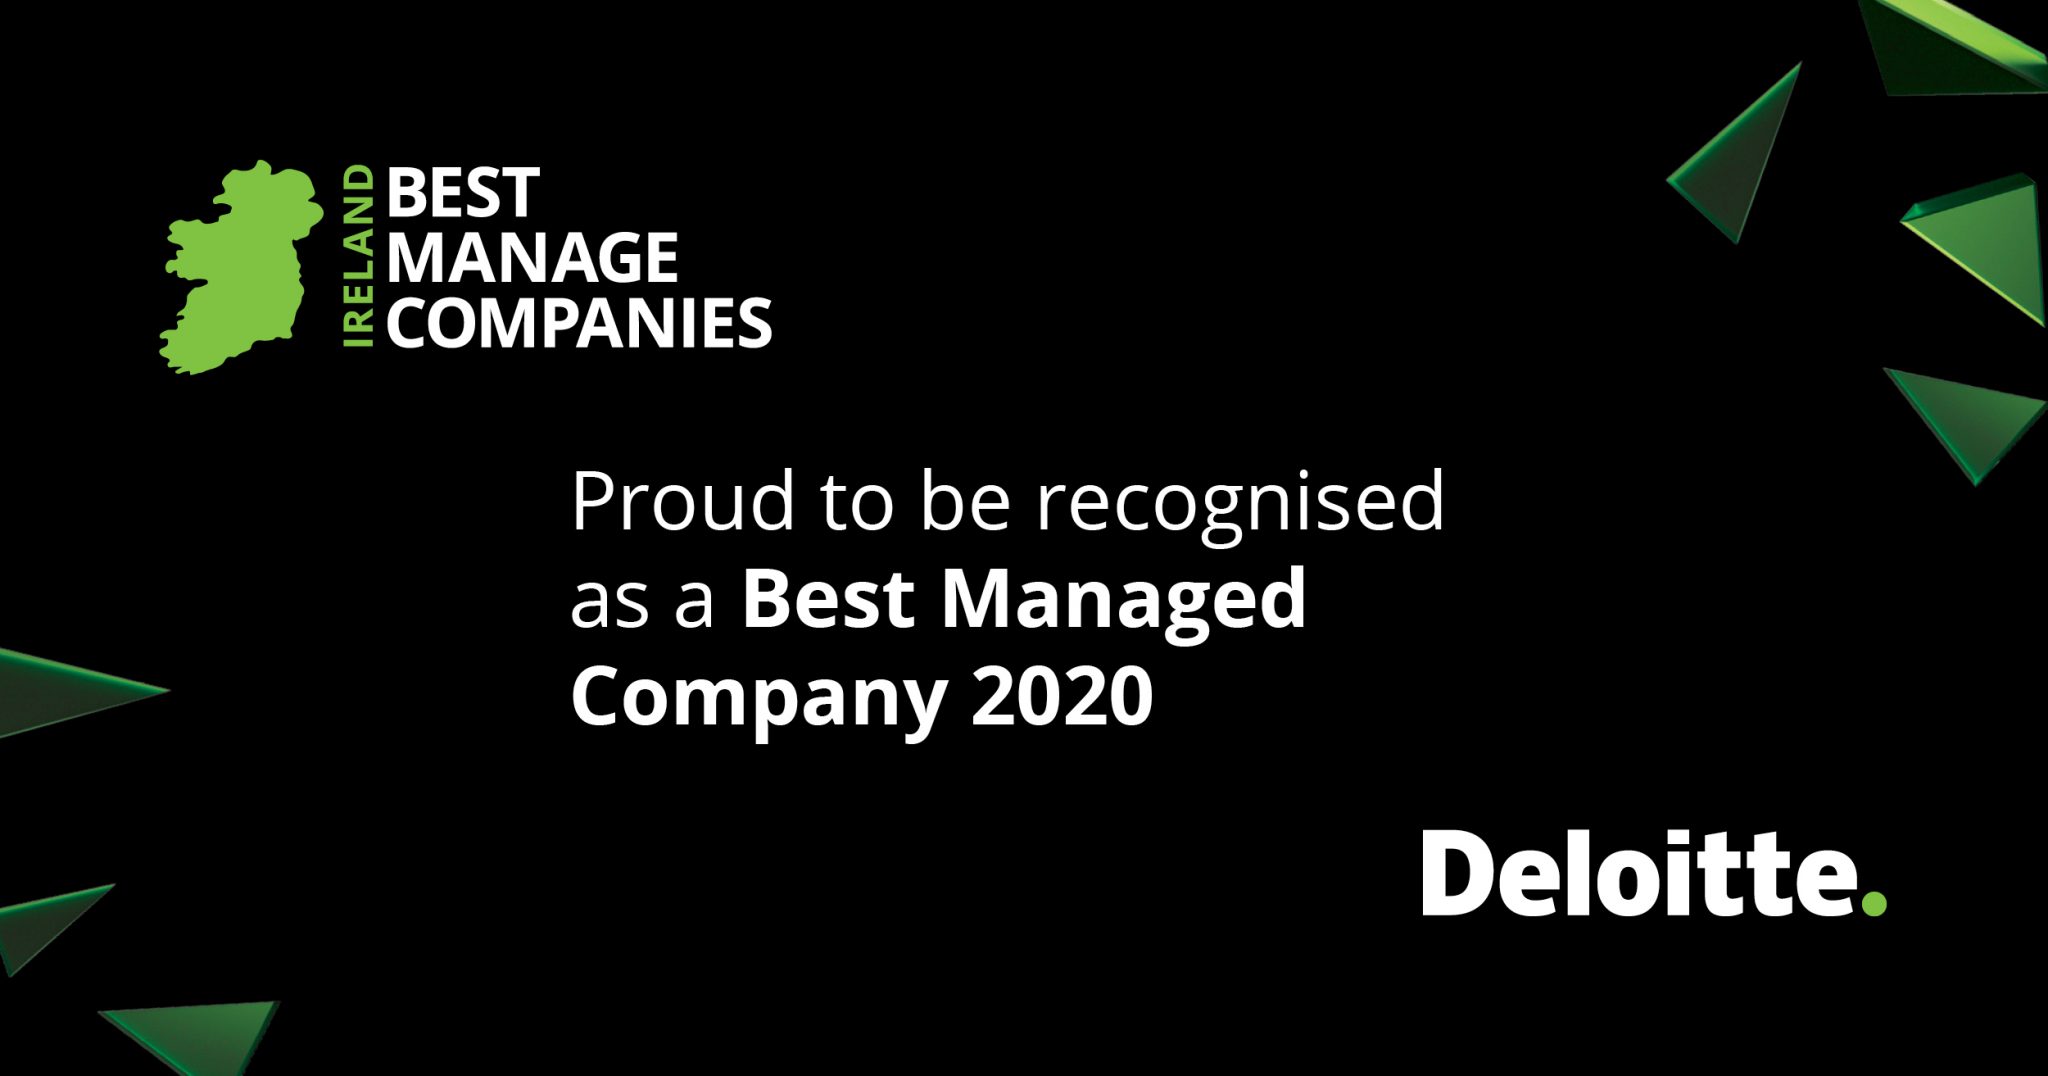 Text announcing Mount Charles as a best managed company for 2020 by Deloitte.